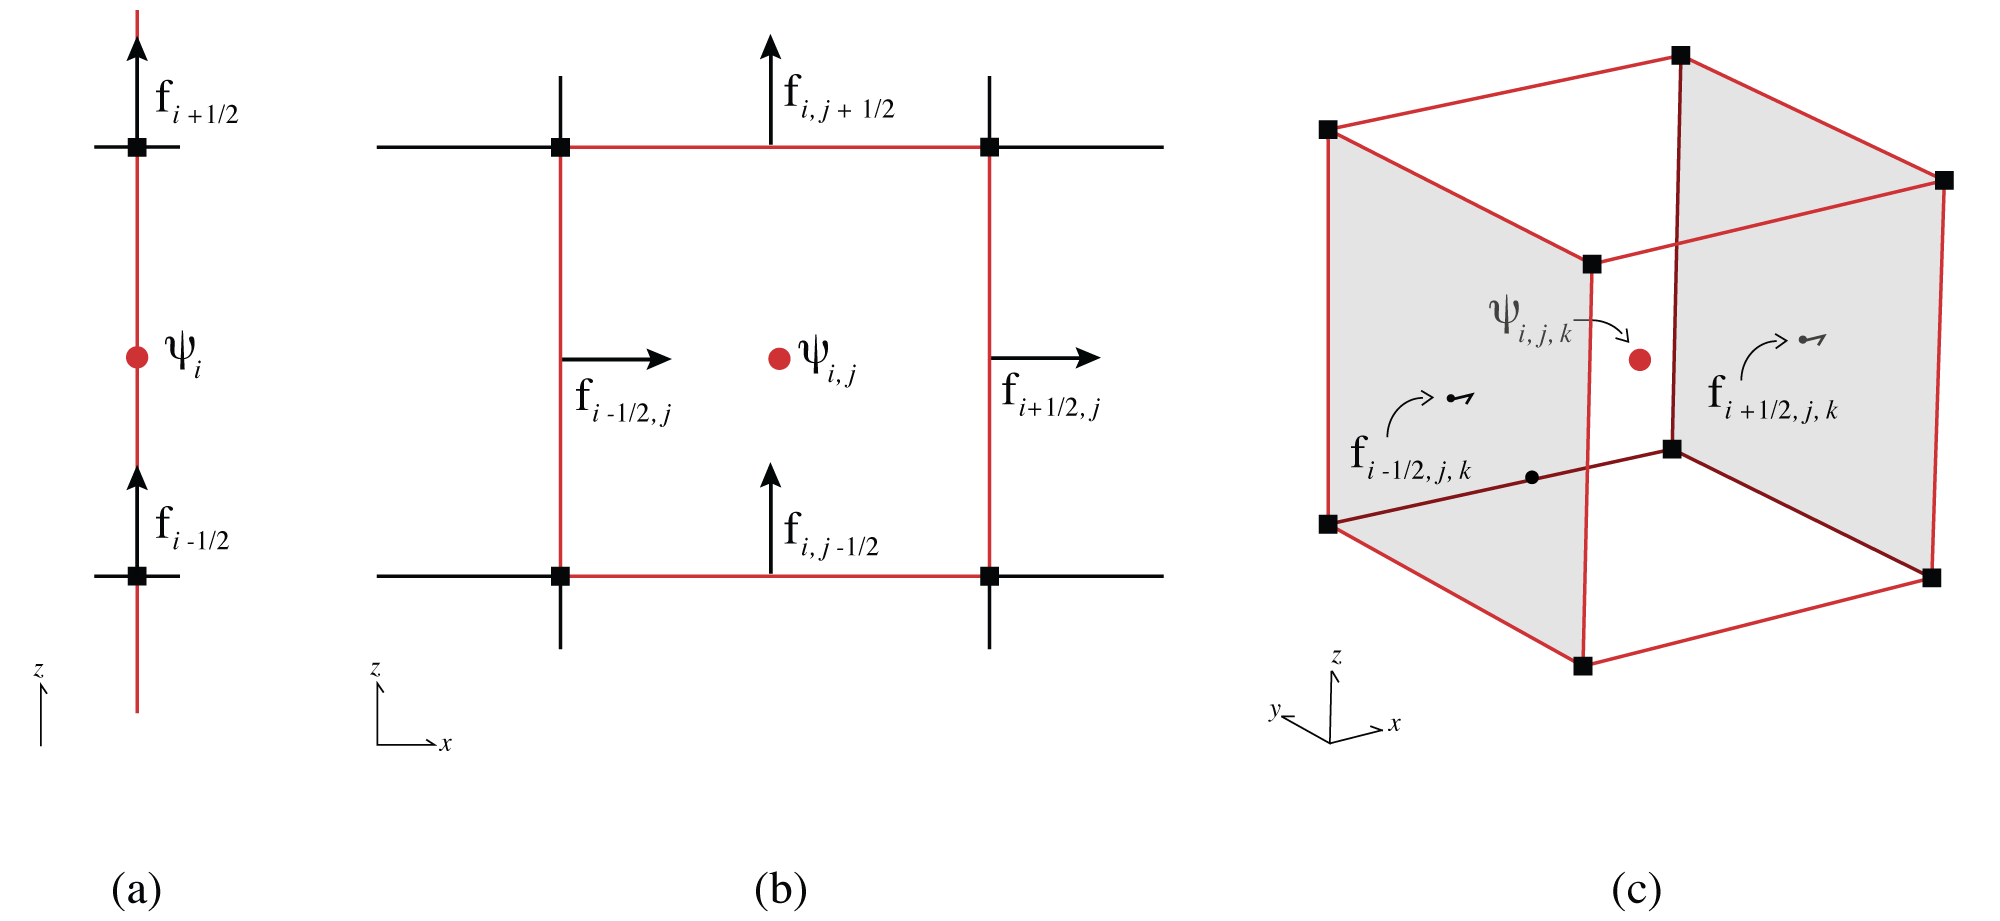 Discretization of unknowns in 1D, 2D and 3D space. Red circles are the locations of the discrete hydraulic conductivity K and the pressure head \psi.
The arrows are the locations of the discretized flux \vec f on each cell face. Modified after Cockett et al. (2016).